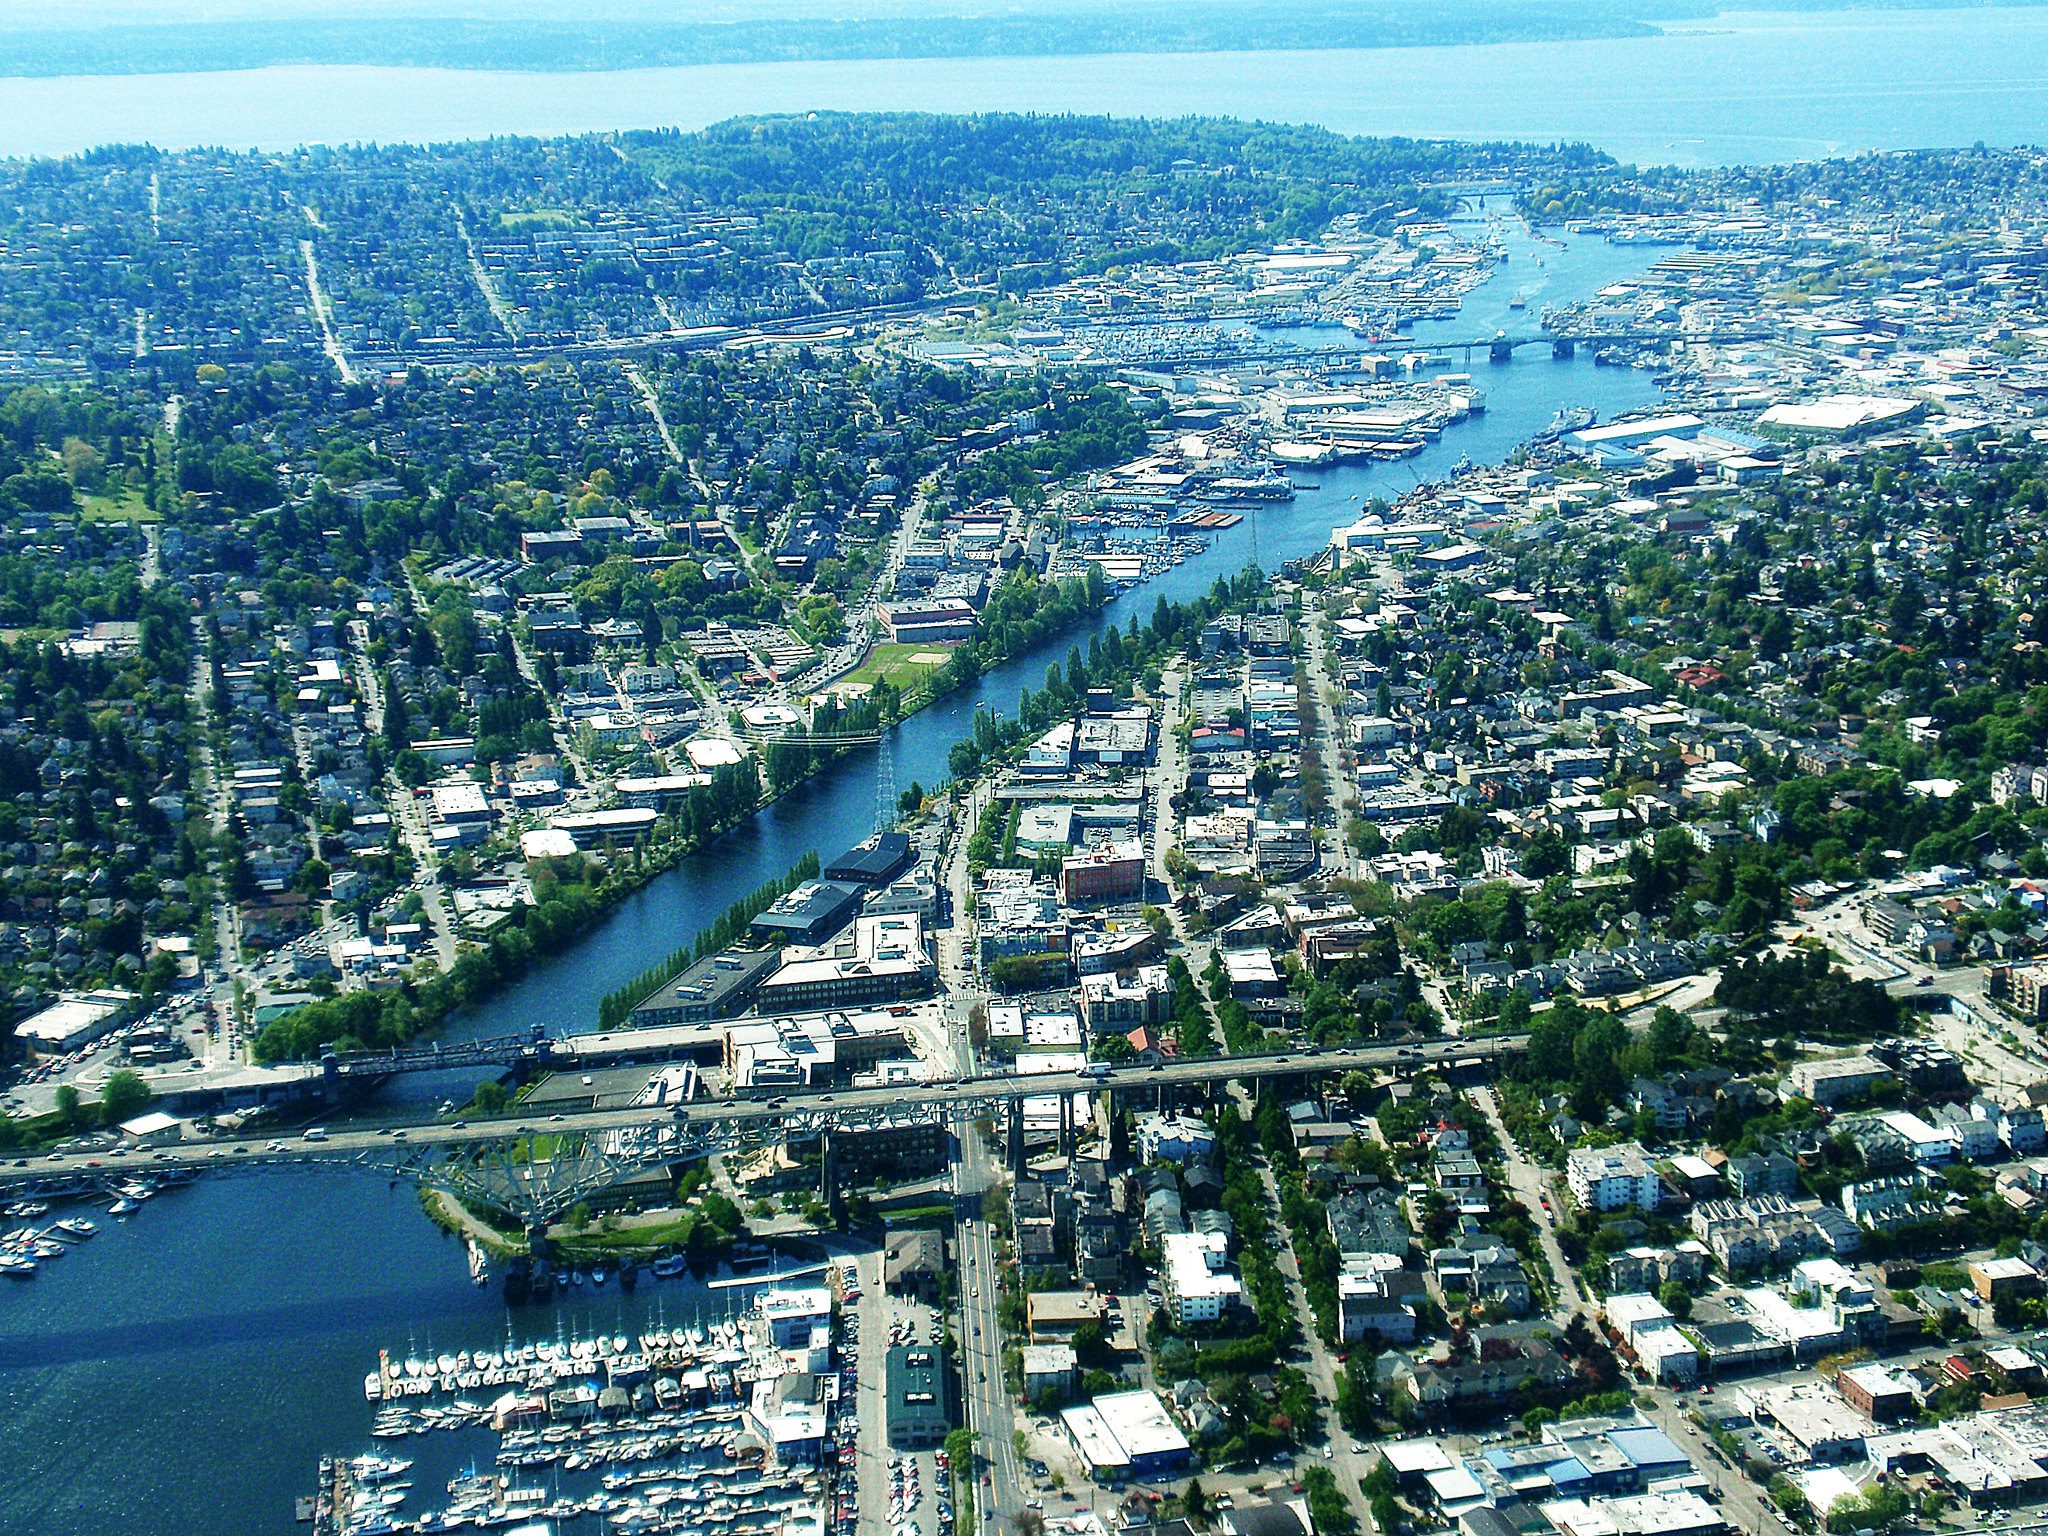 An aerial view of the ship canal with the Ballard Bridge in the distance surrounded by Seattle neighborhoods.